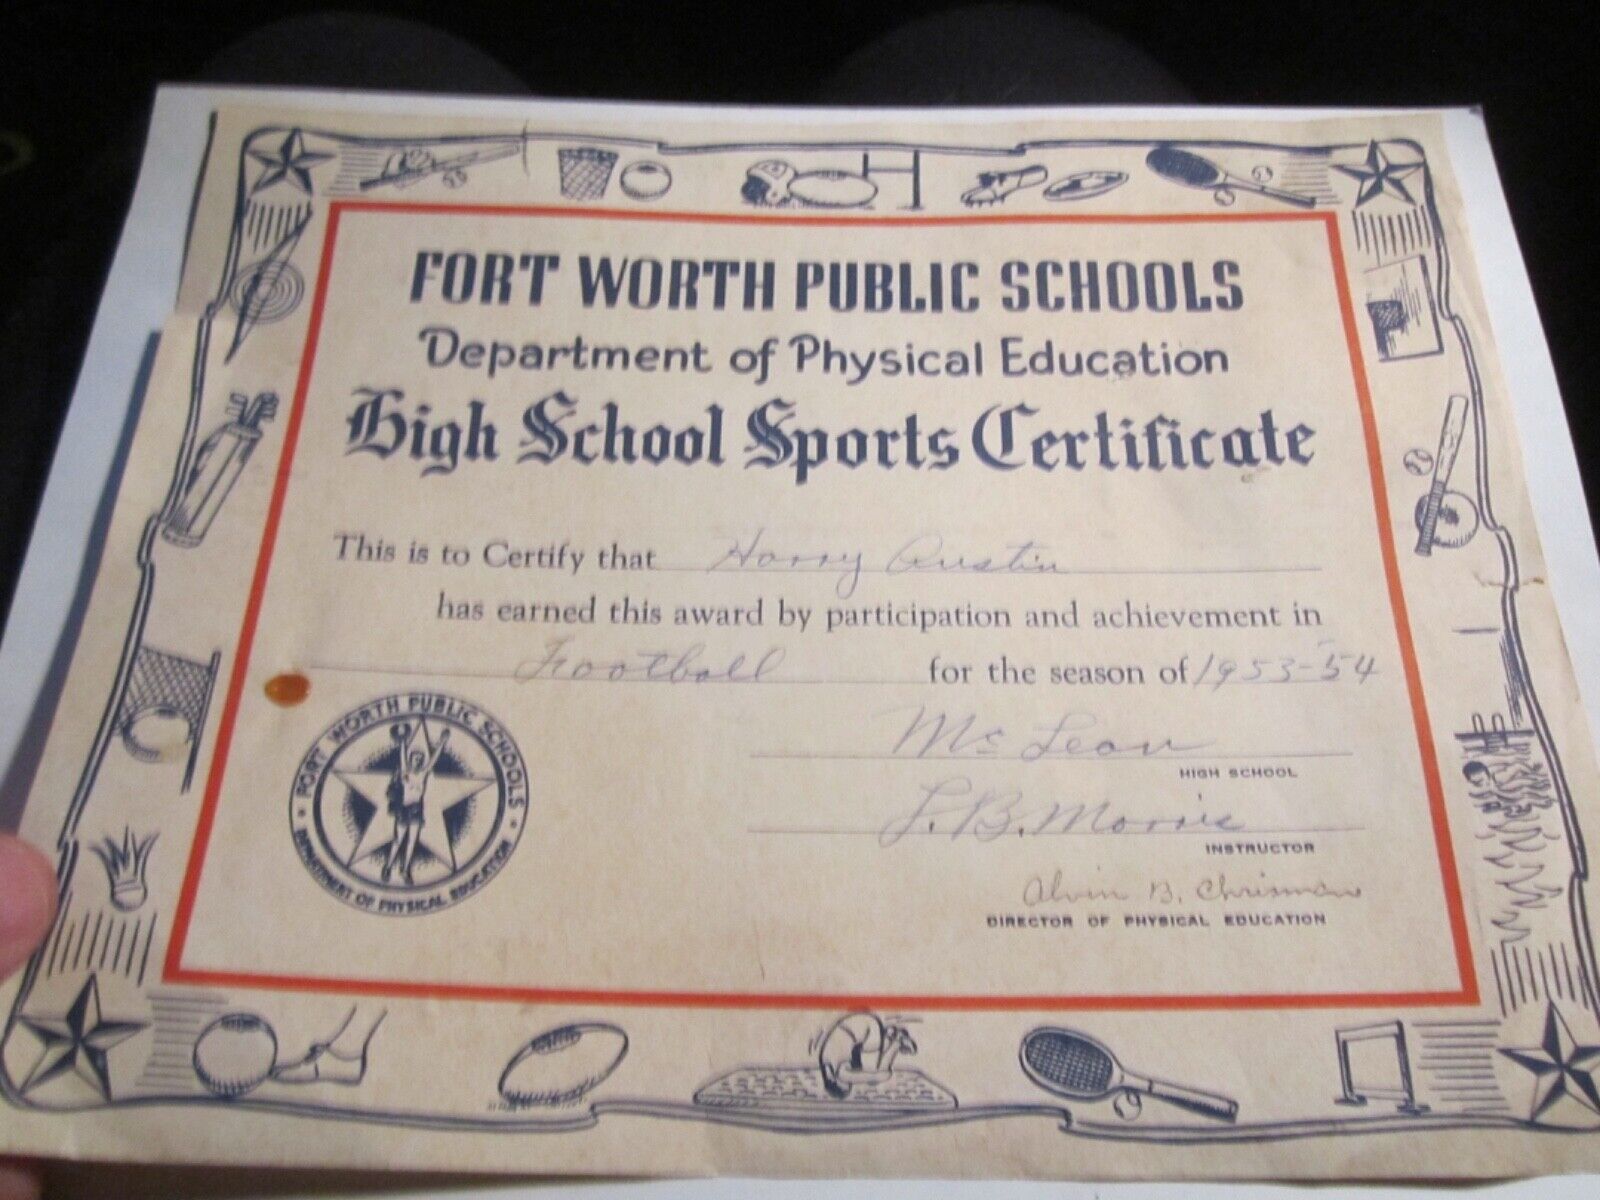 1953 FORT WORTH PUBLIC SCHOOLS HIGH SCHOOL SPORTS CERTIFICATE SIGNED - BBA-52